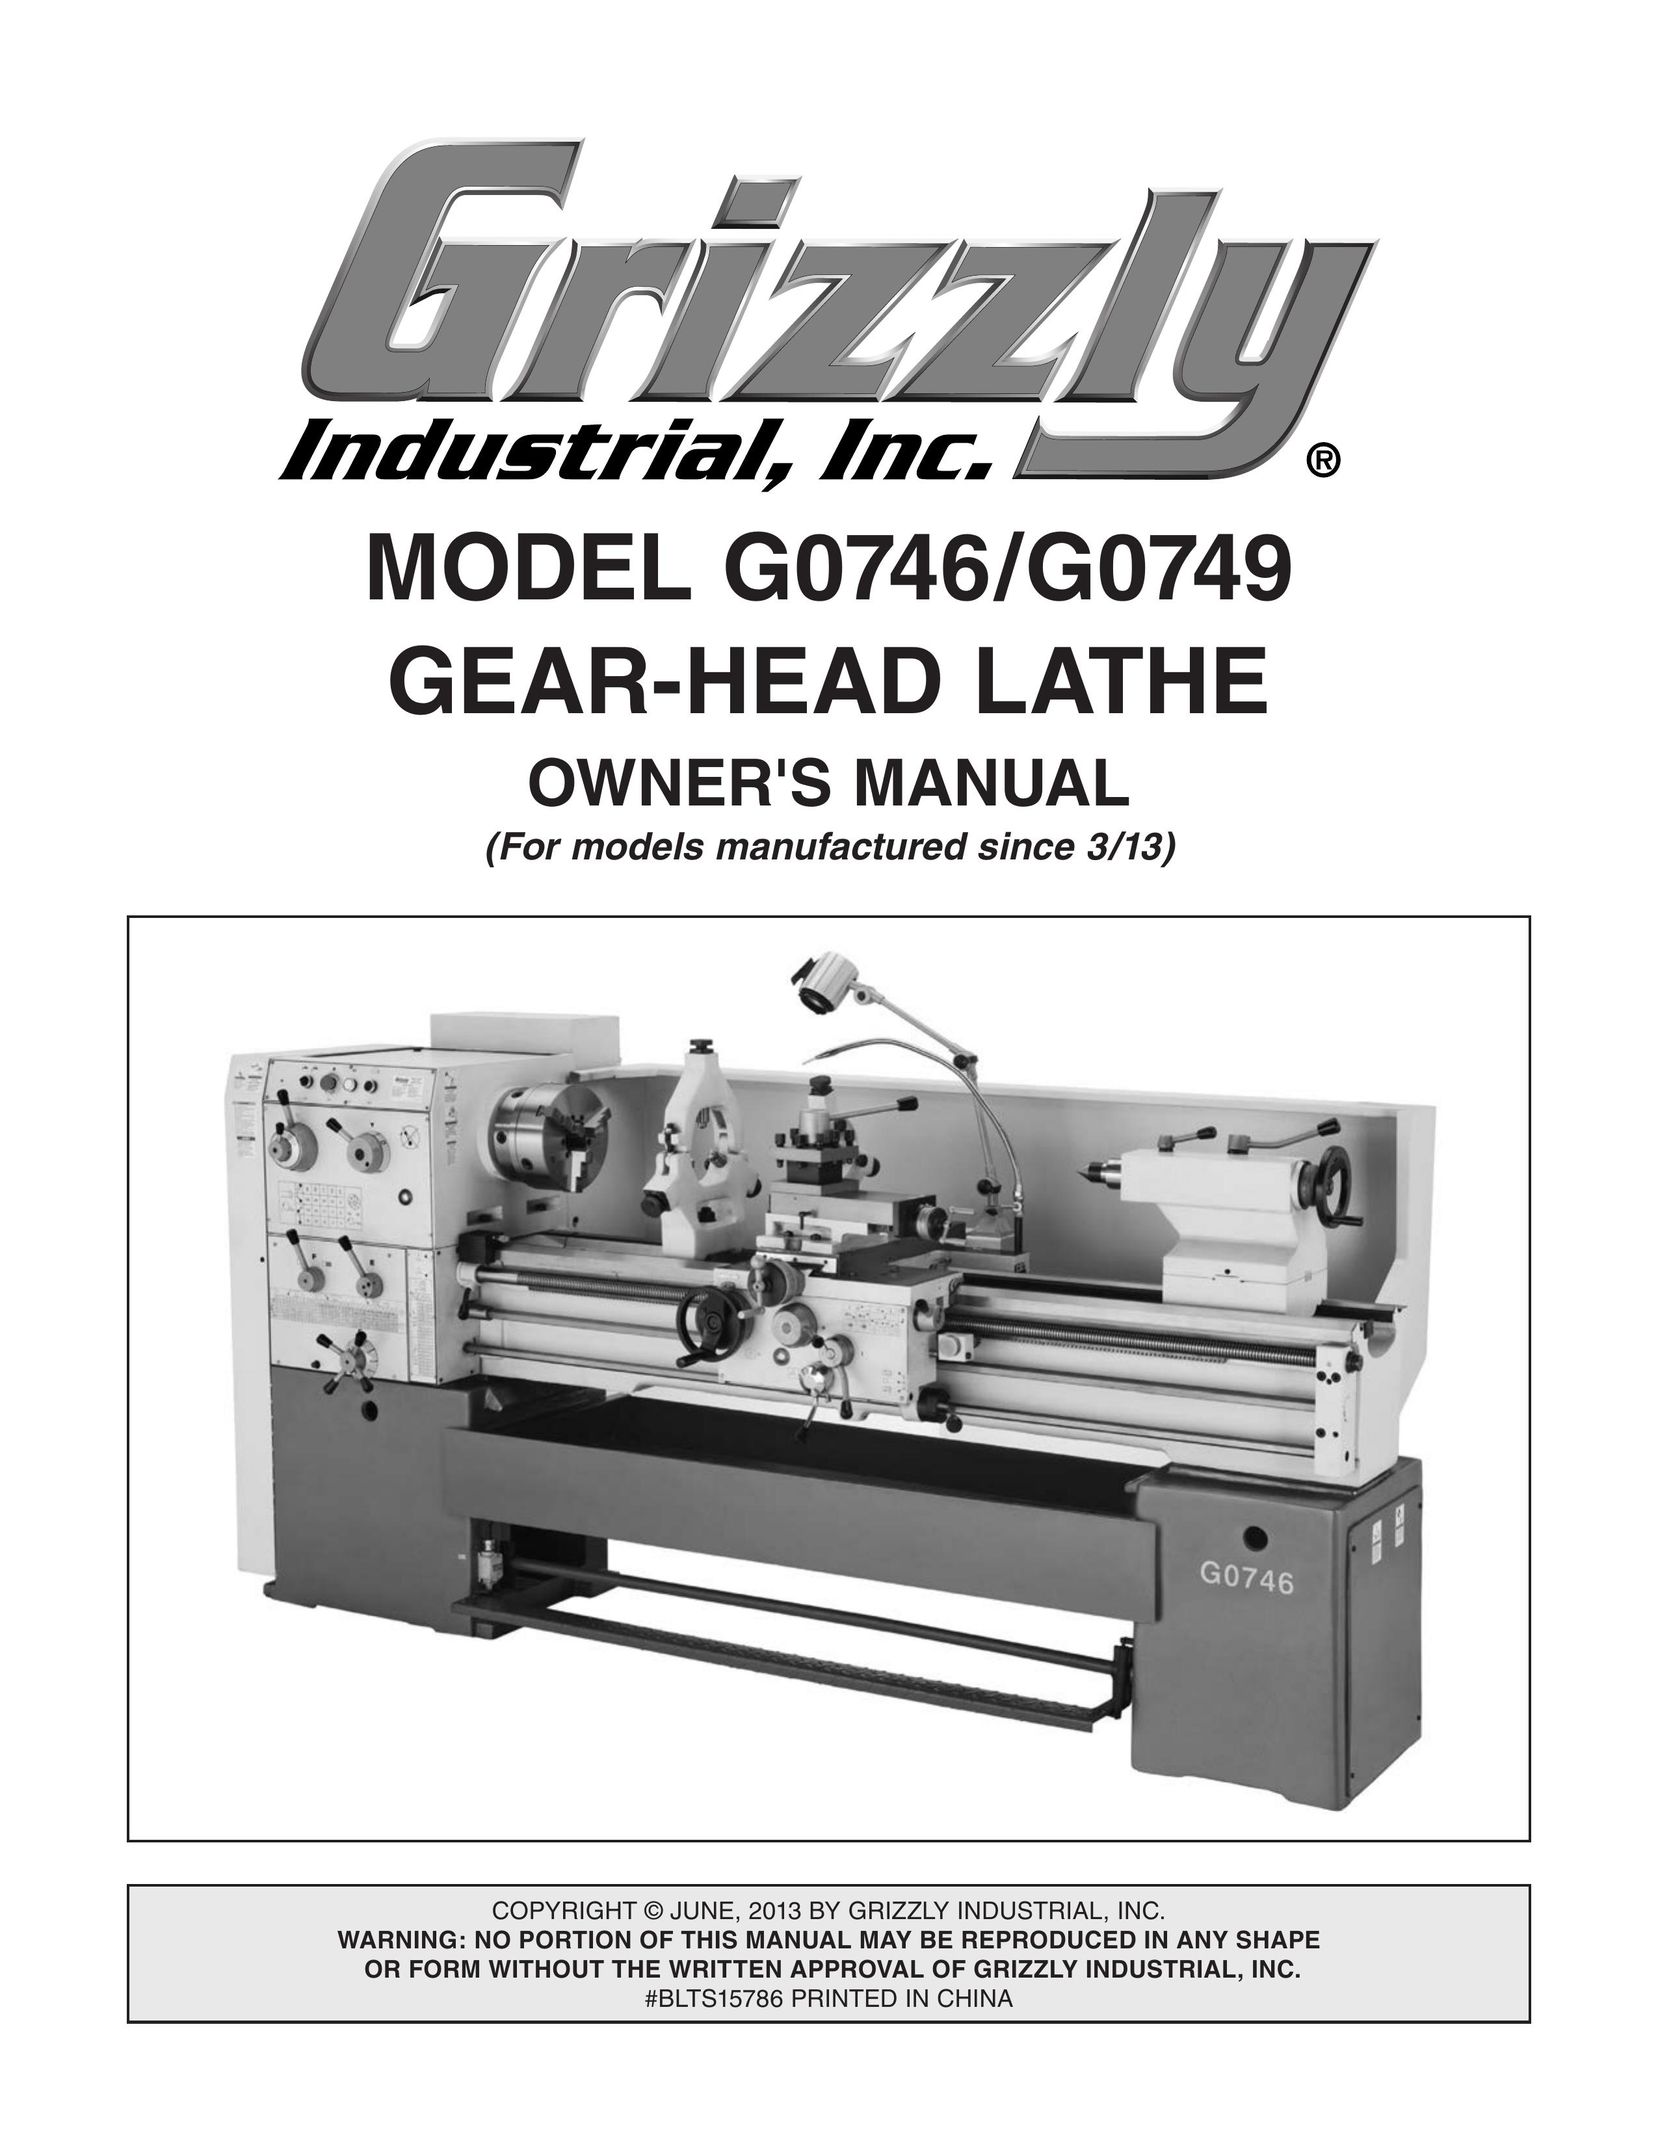 Grizzly g0749 Lathe User Manual